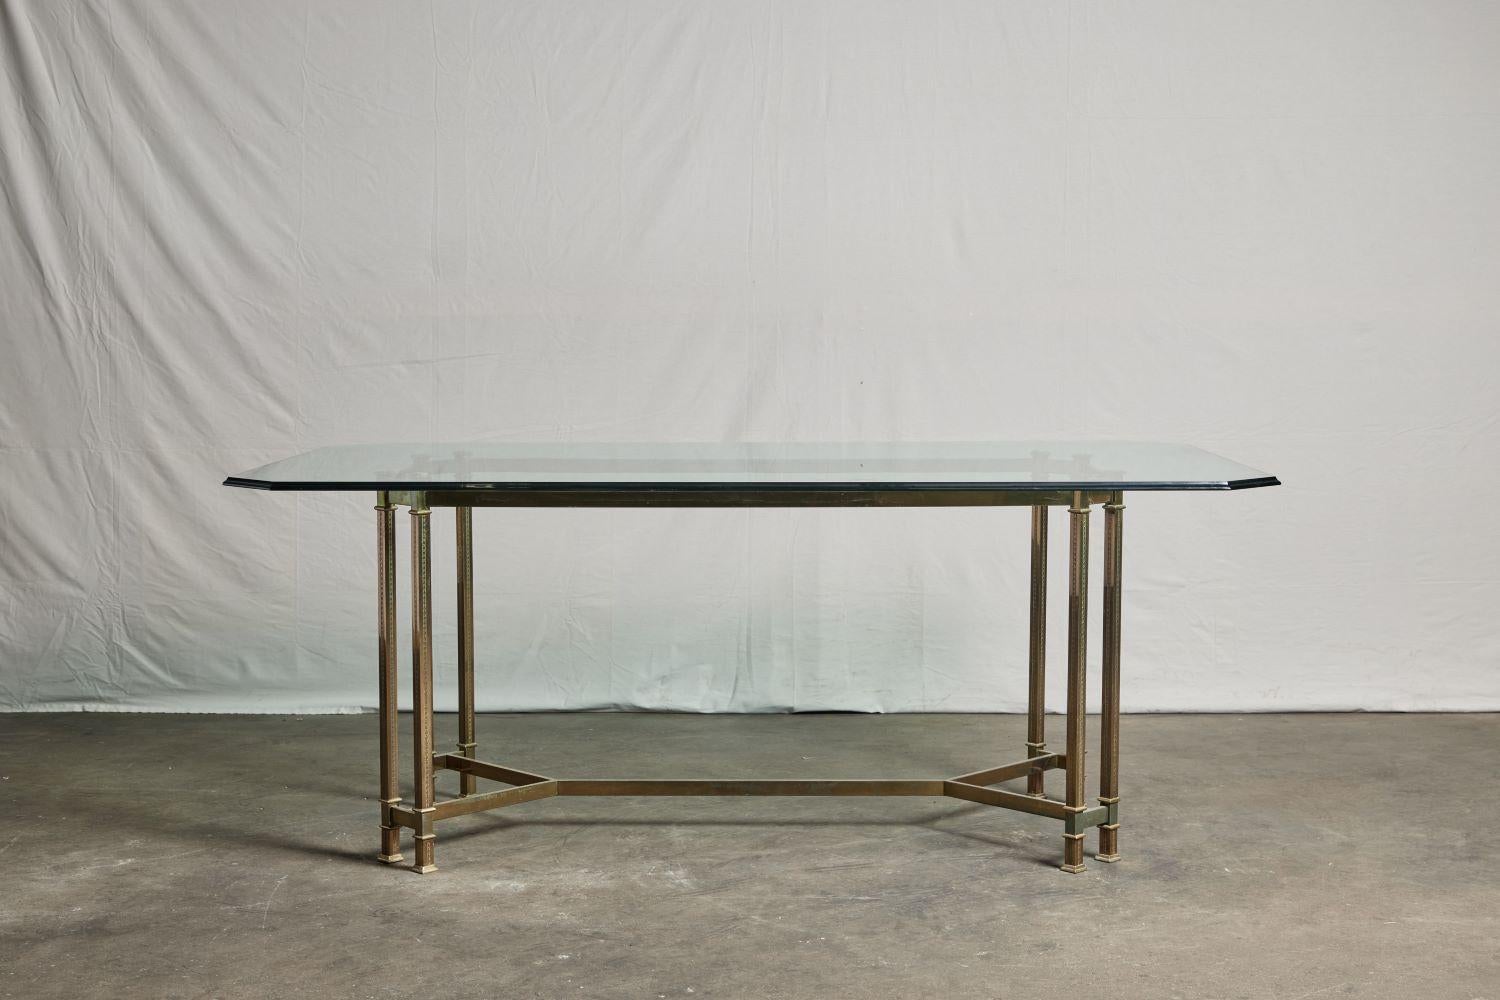 Mid-20th century glass top dining table with removable top.